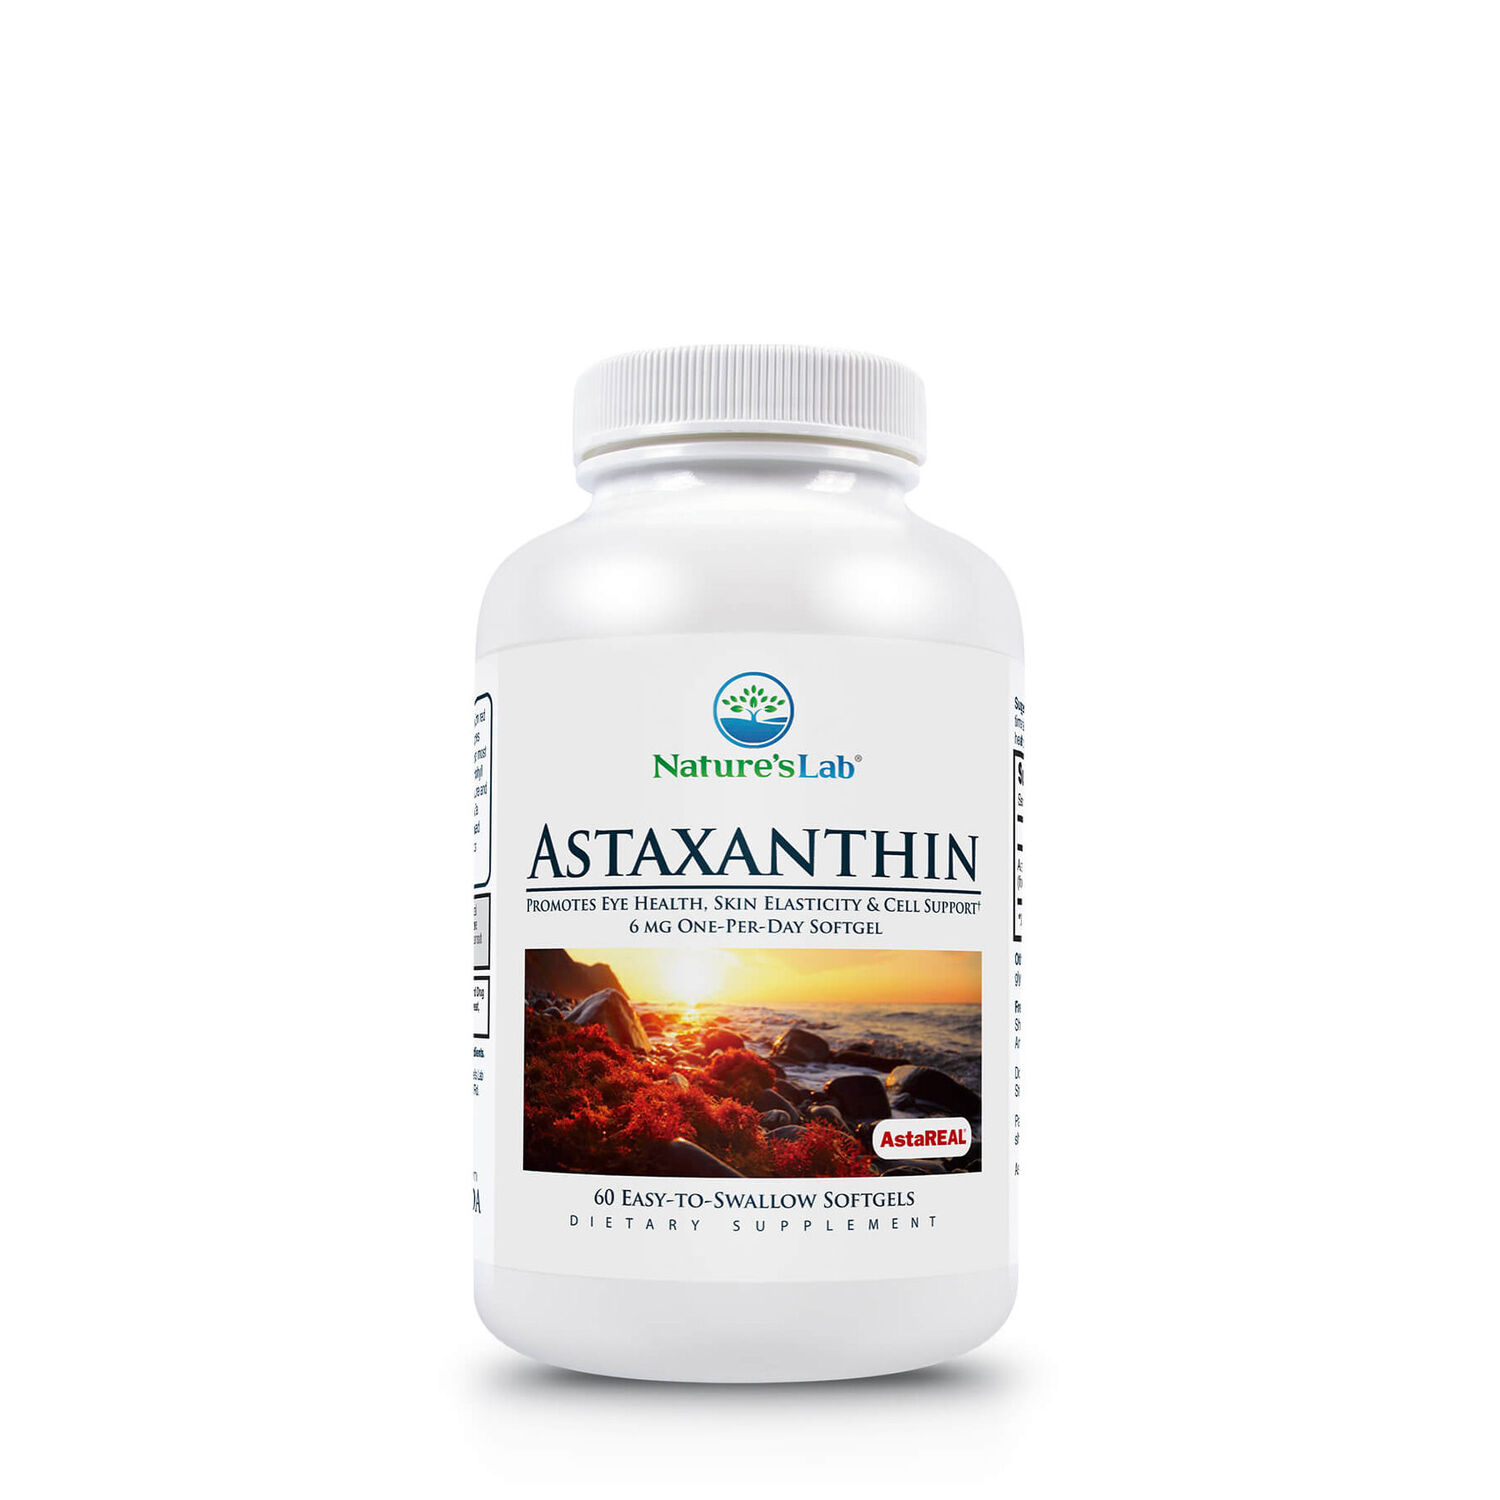 Nature's Lab Astareal Astaxanthin - 6Mg - 60 Soft Gels (60 Servings)